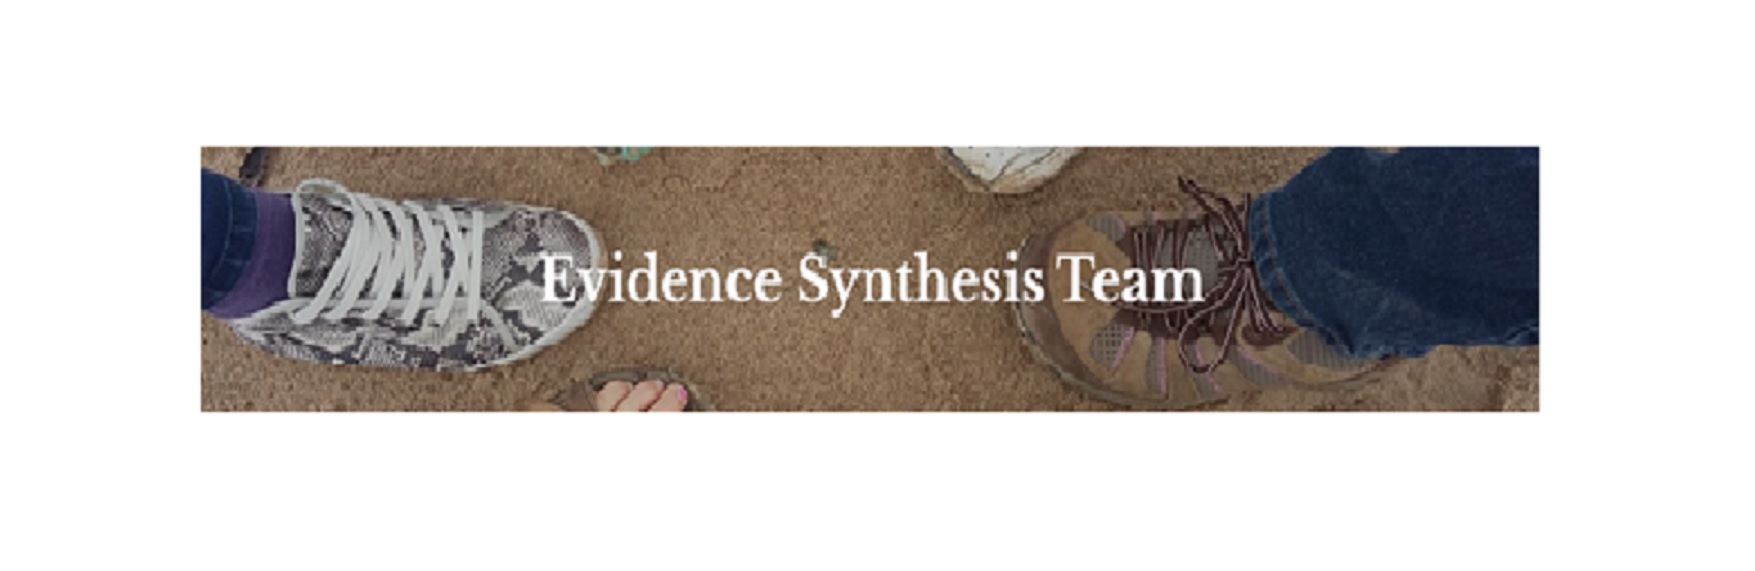 Evidence Synthesis